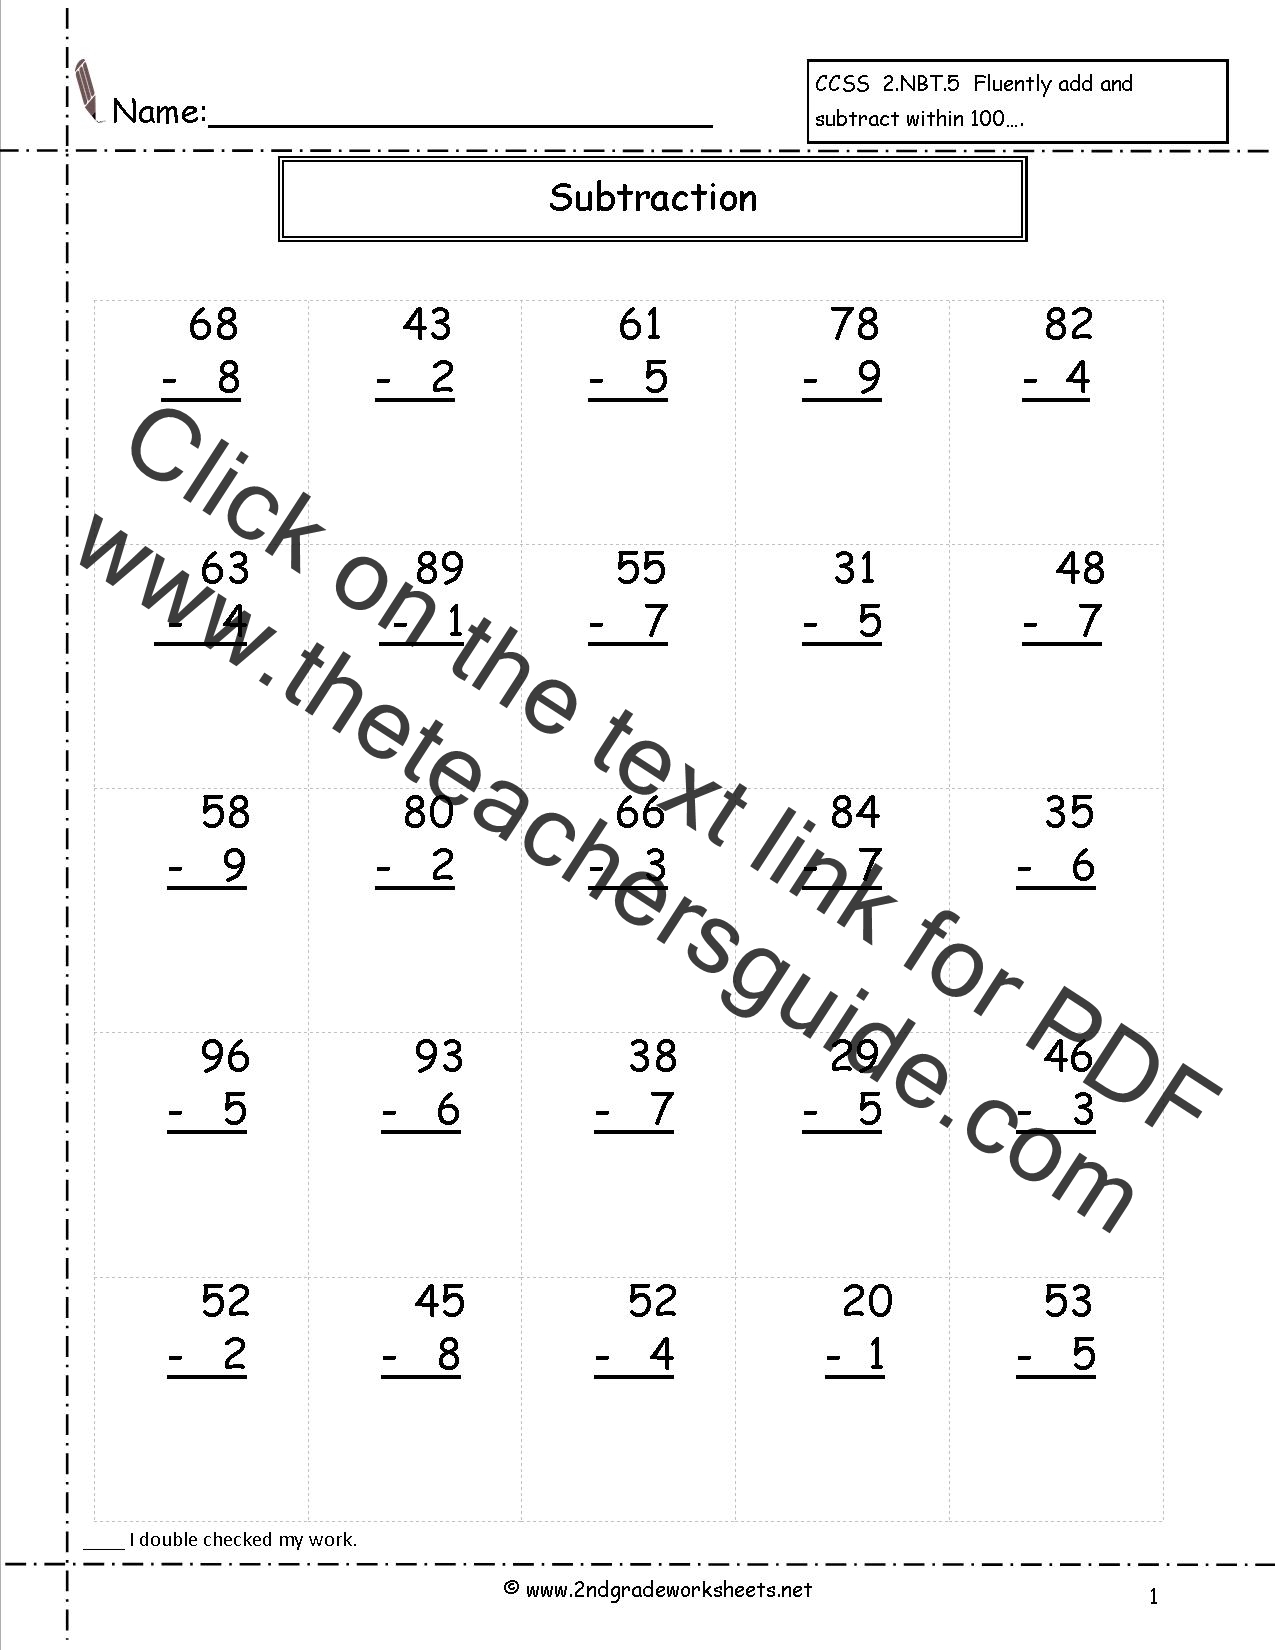 subtracting-two-digit-numbers-with-regrouping-lesson-plans-worksheets